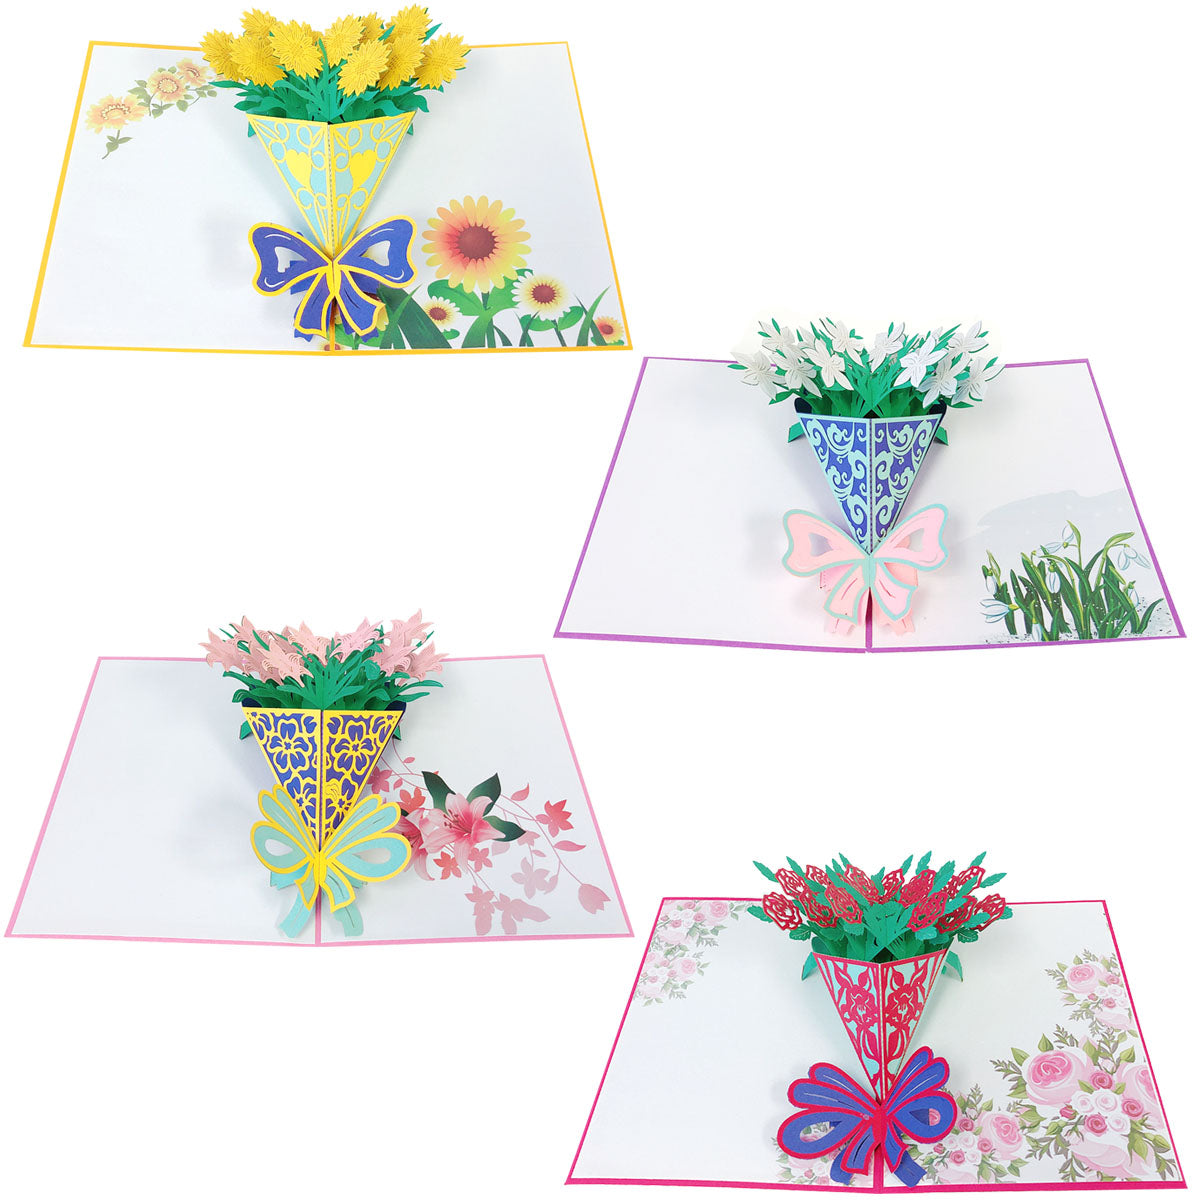 Wrapables 3D Pop-Up Greeting Cards for Birthday, Thank you, Anniversary, Wedding, Holidays (Set of 4)